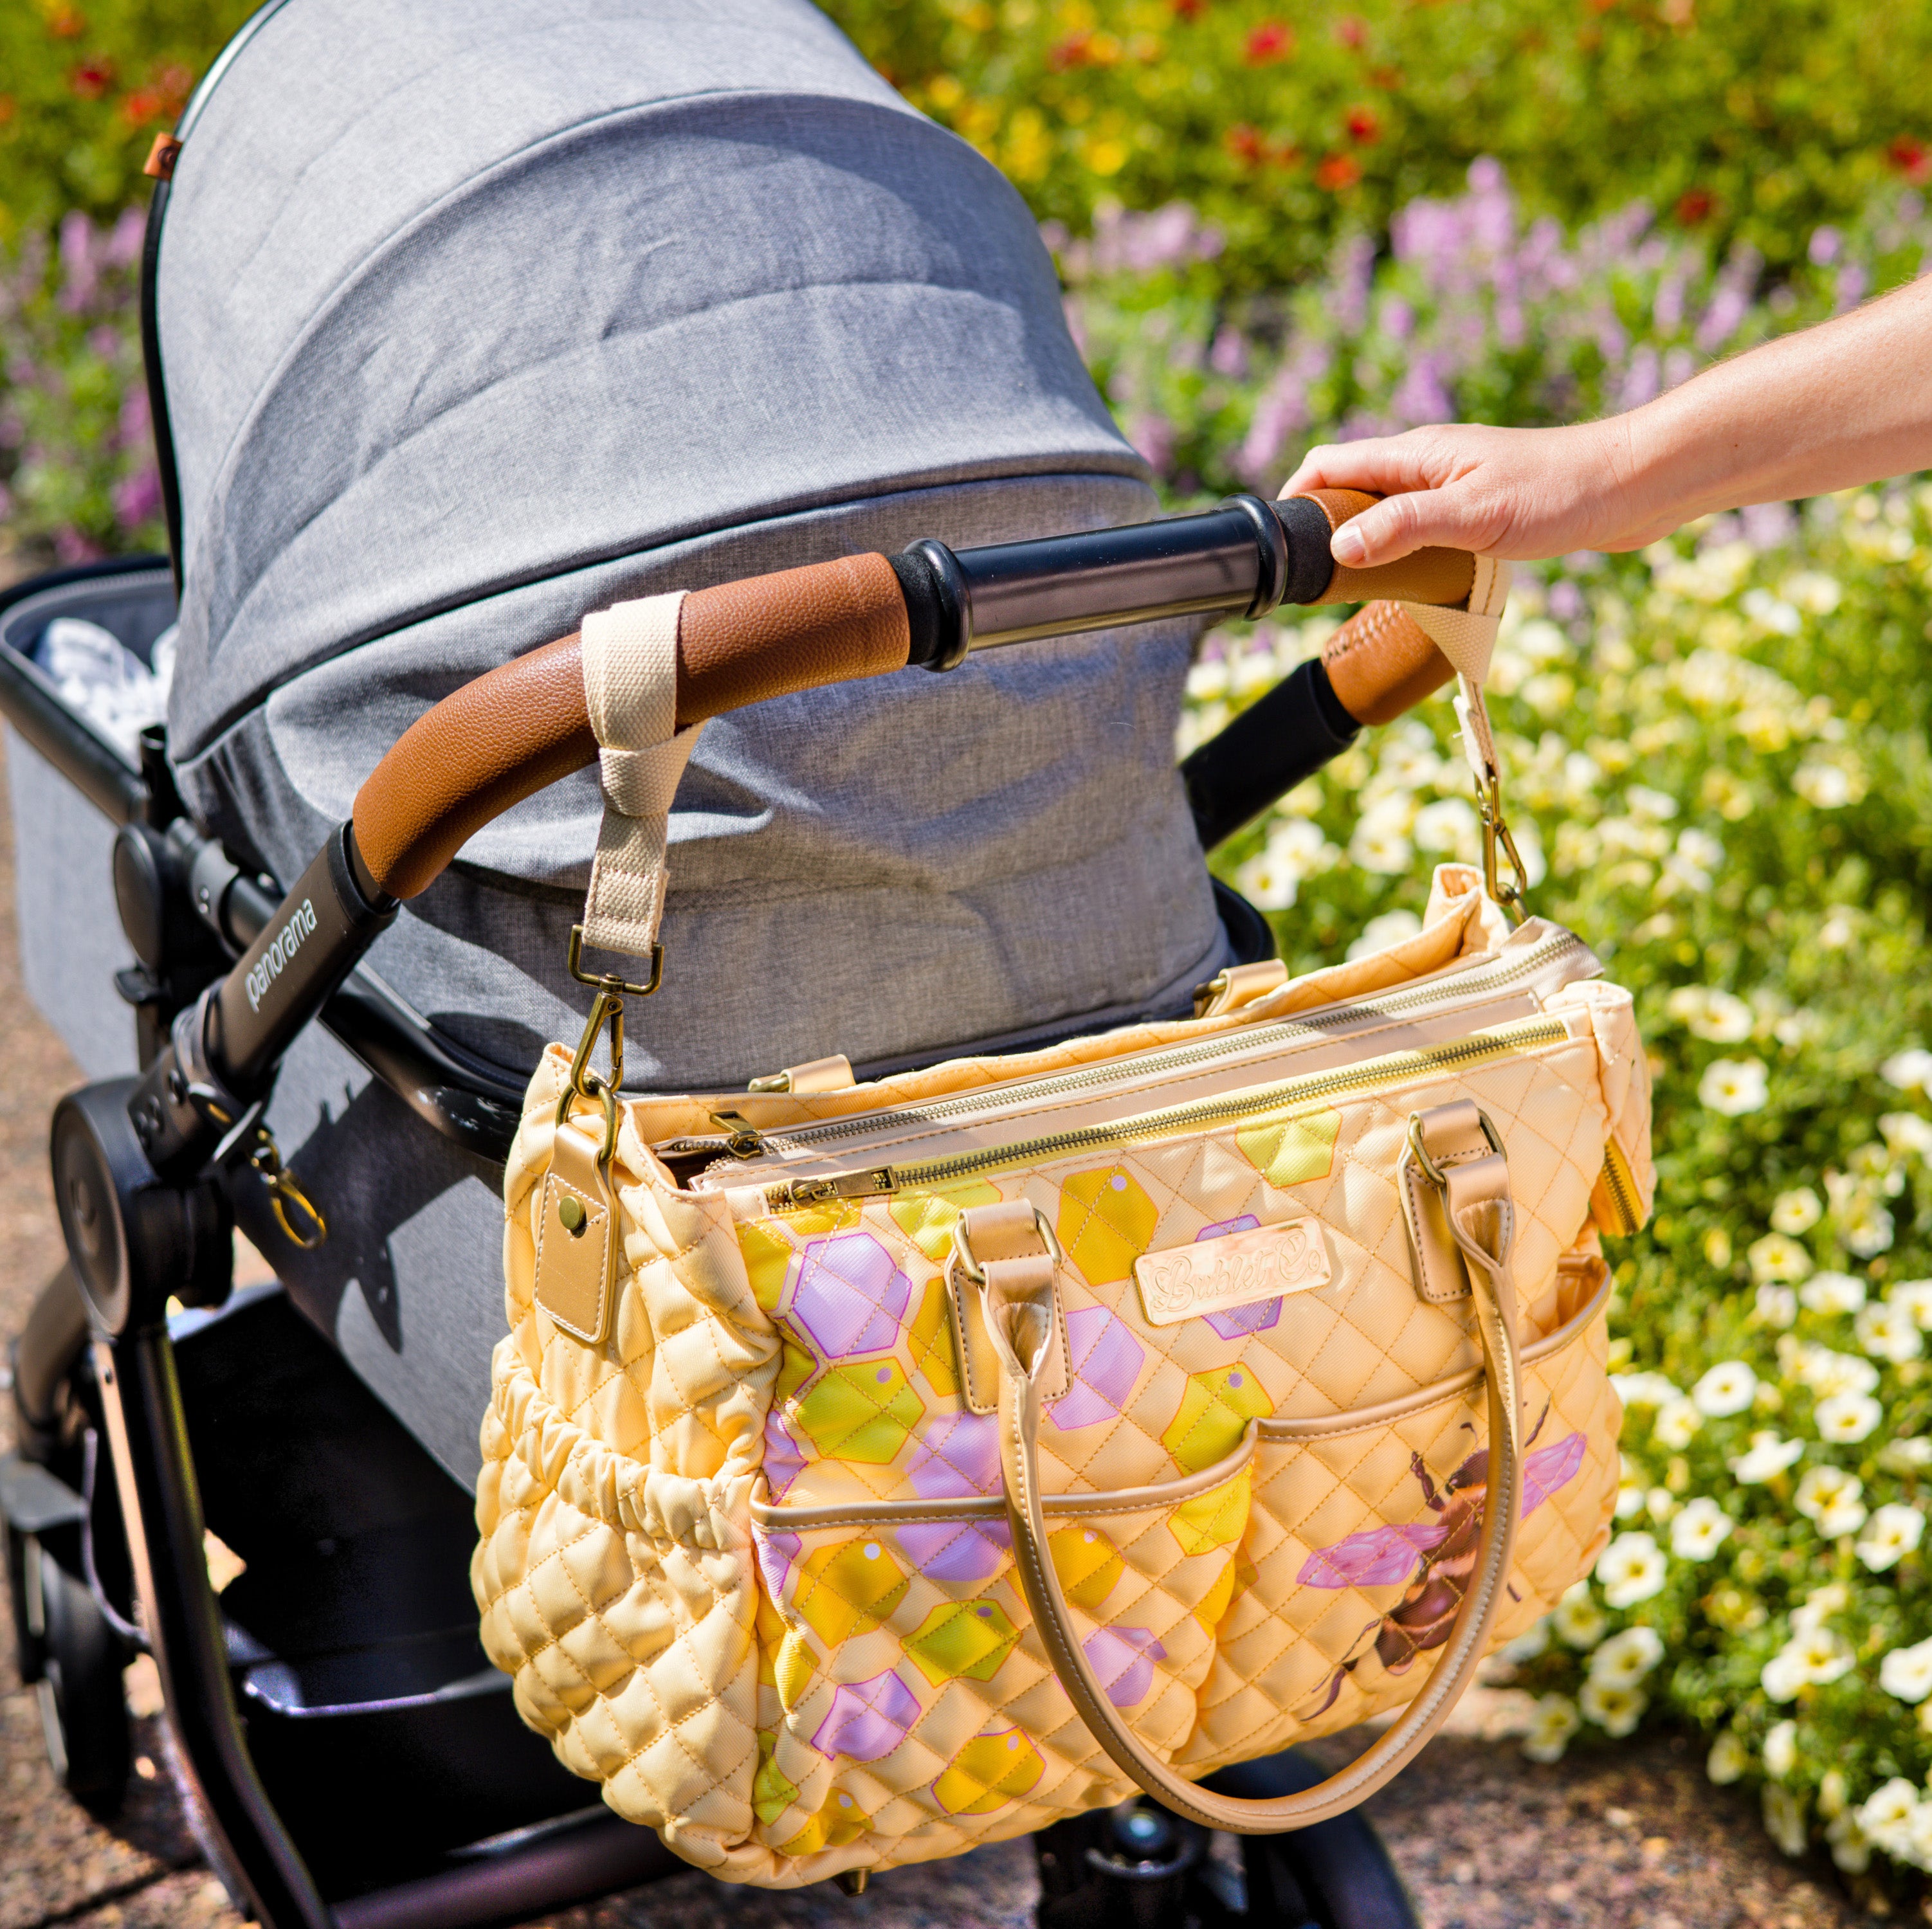 The Best Diaper Bags for Dads – Petunia Pickle Bottom